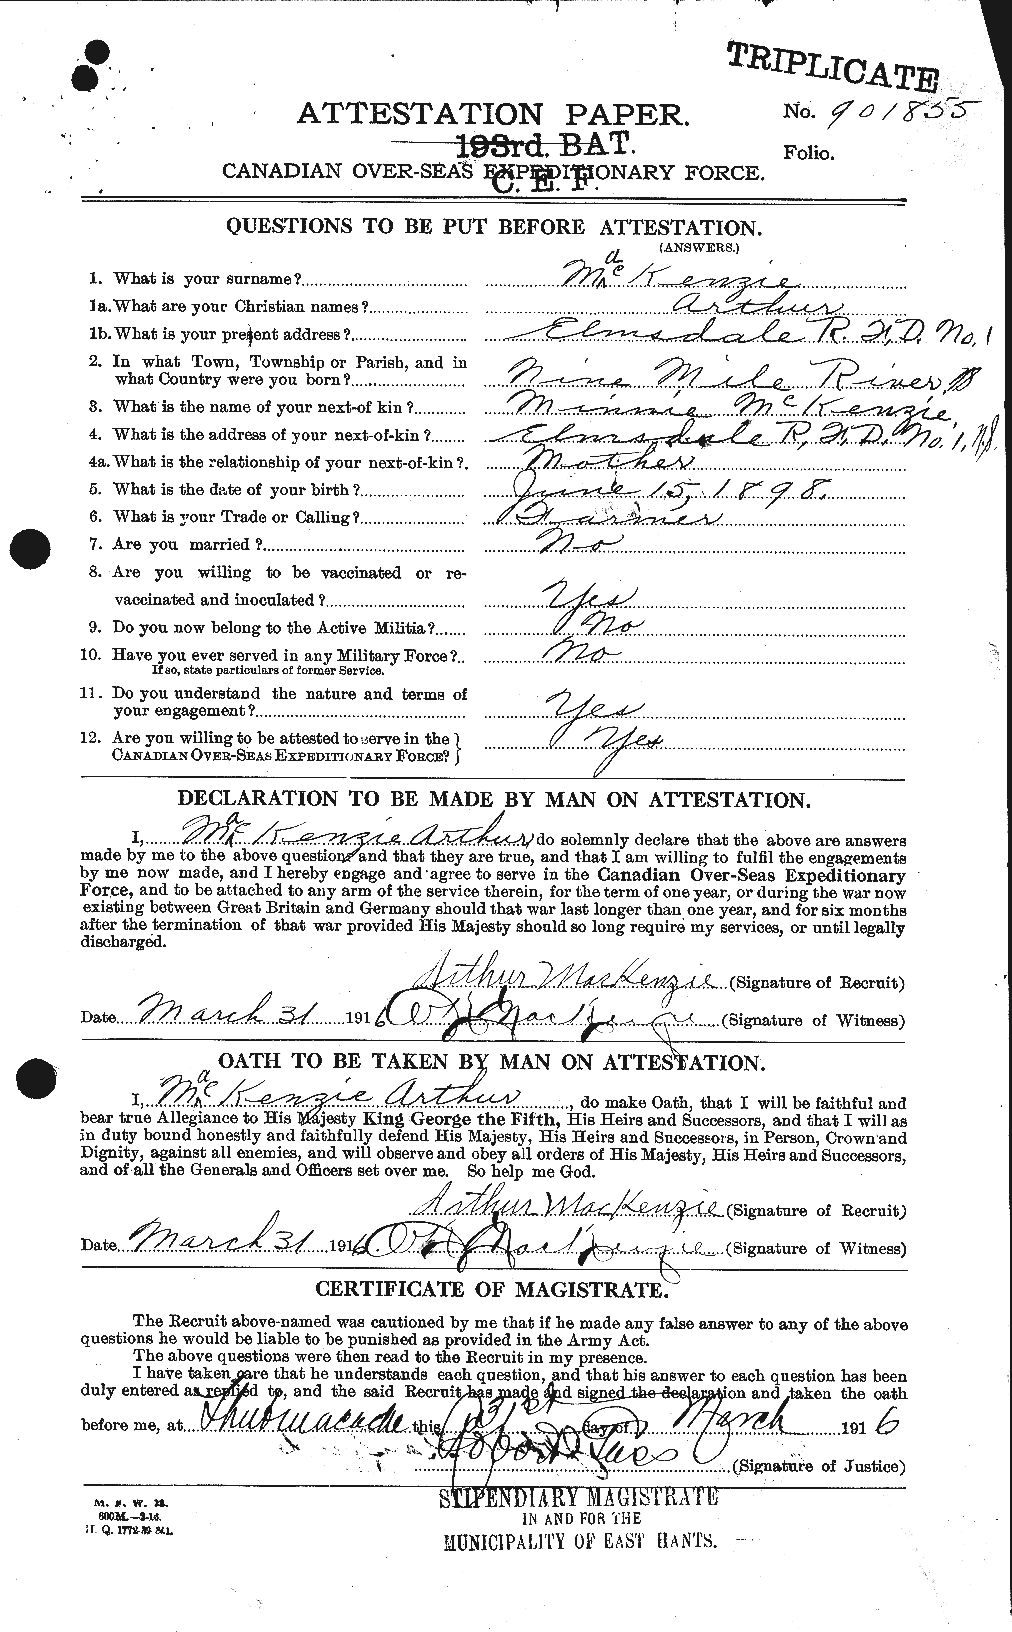 Personnel Records of the First World War - CEF 528888a